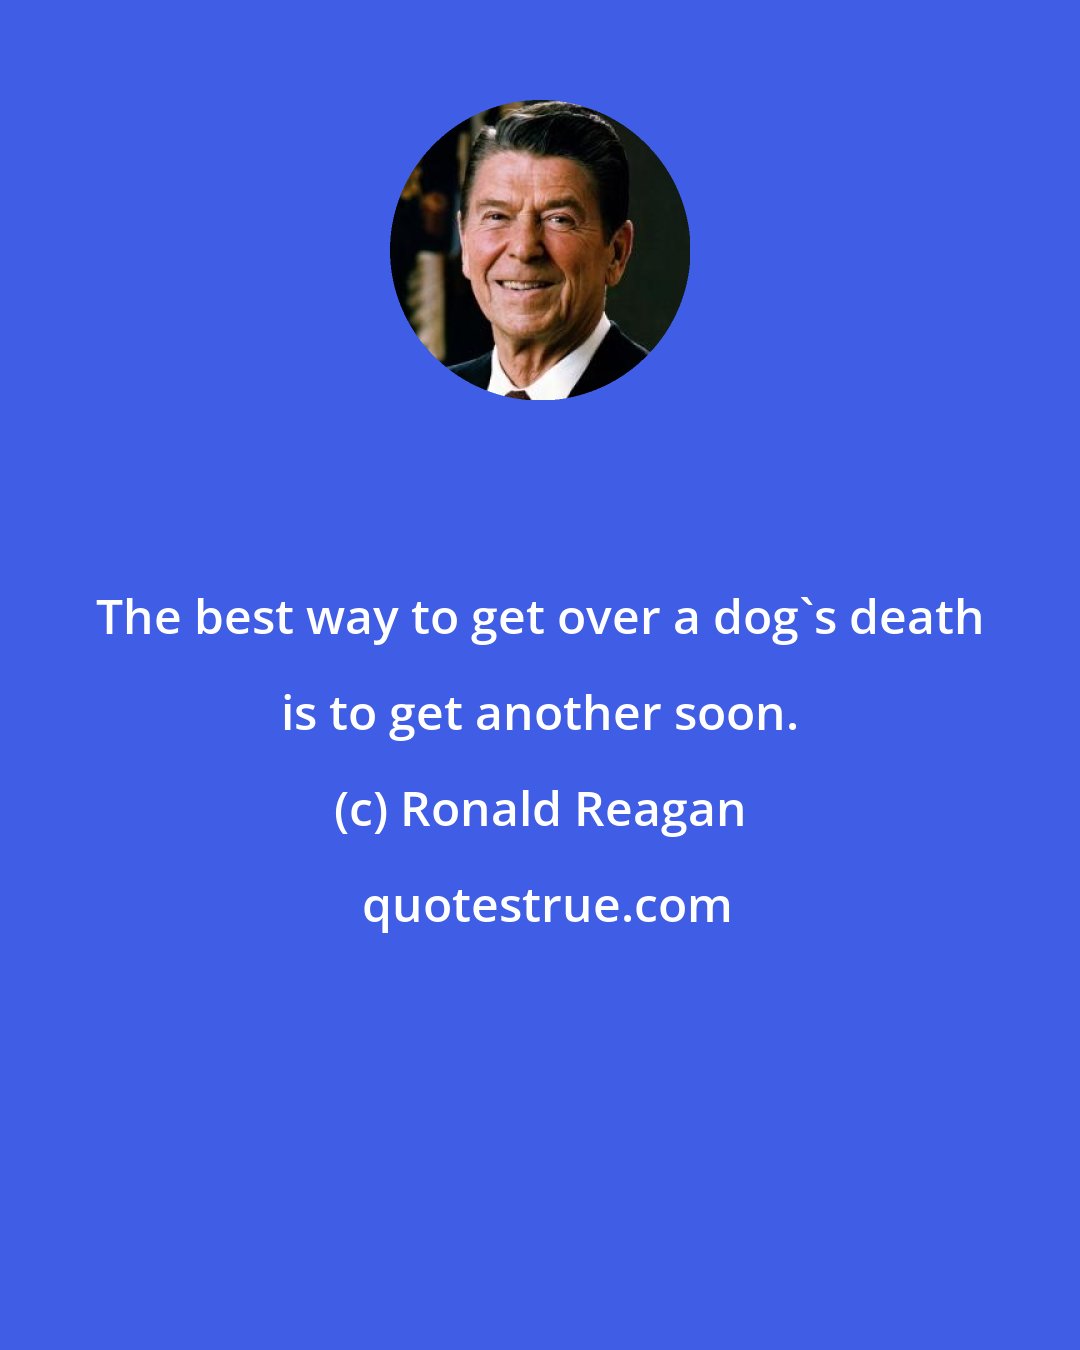 Ronald Reagan: The best way to get over a dog's death is to get another soon.